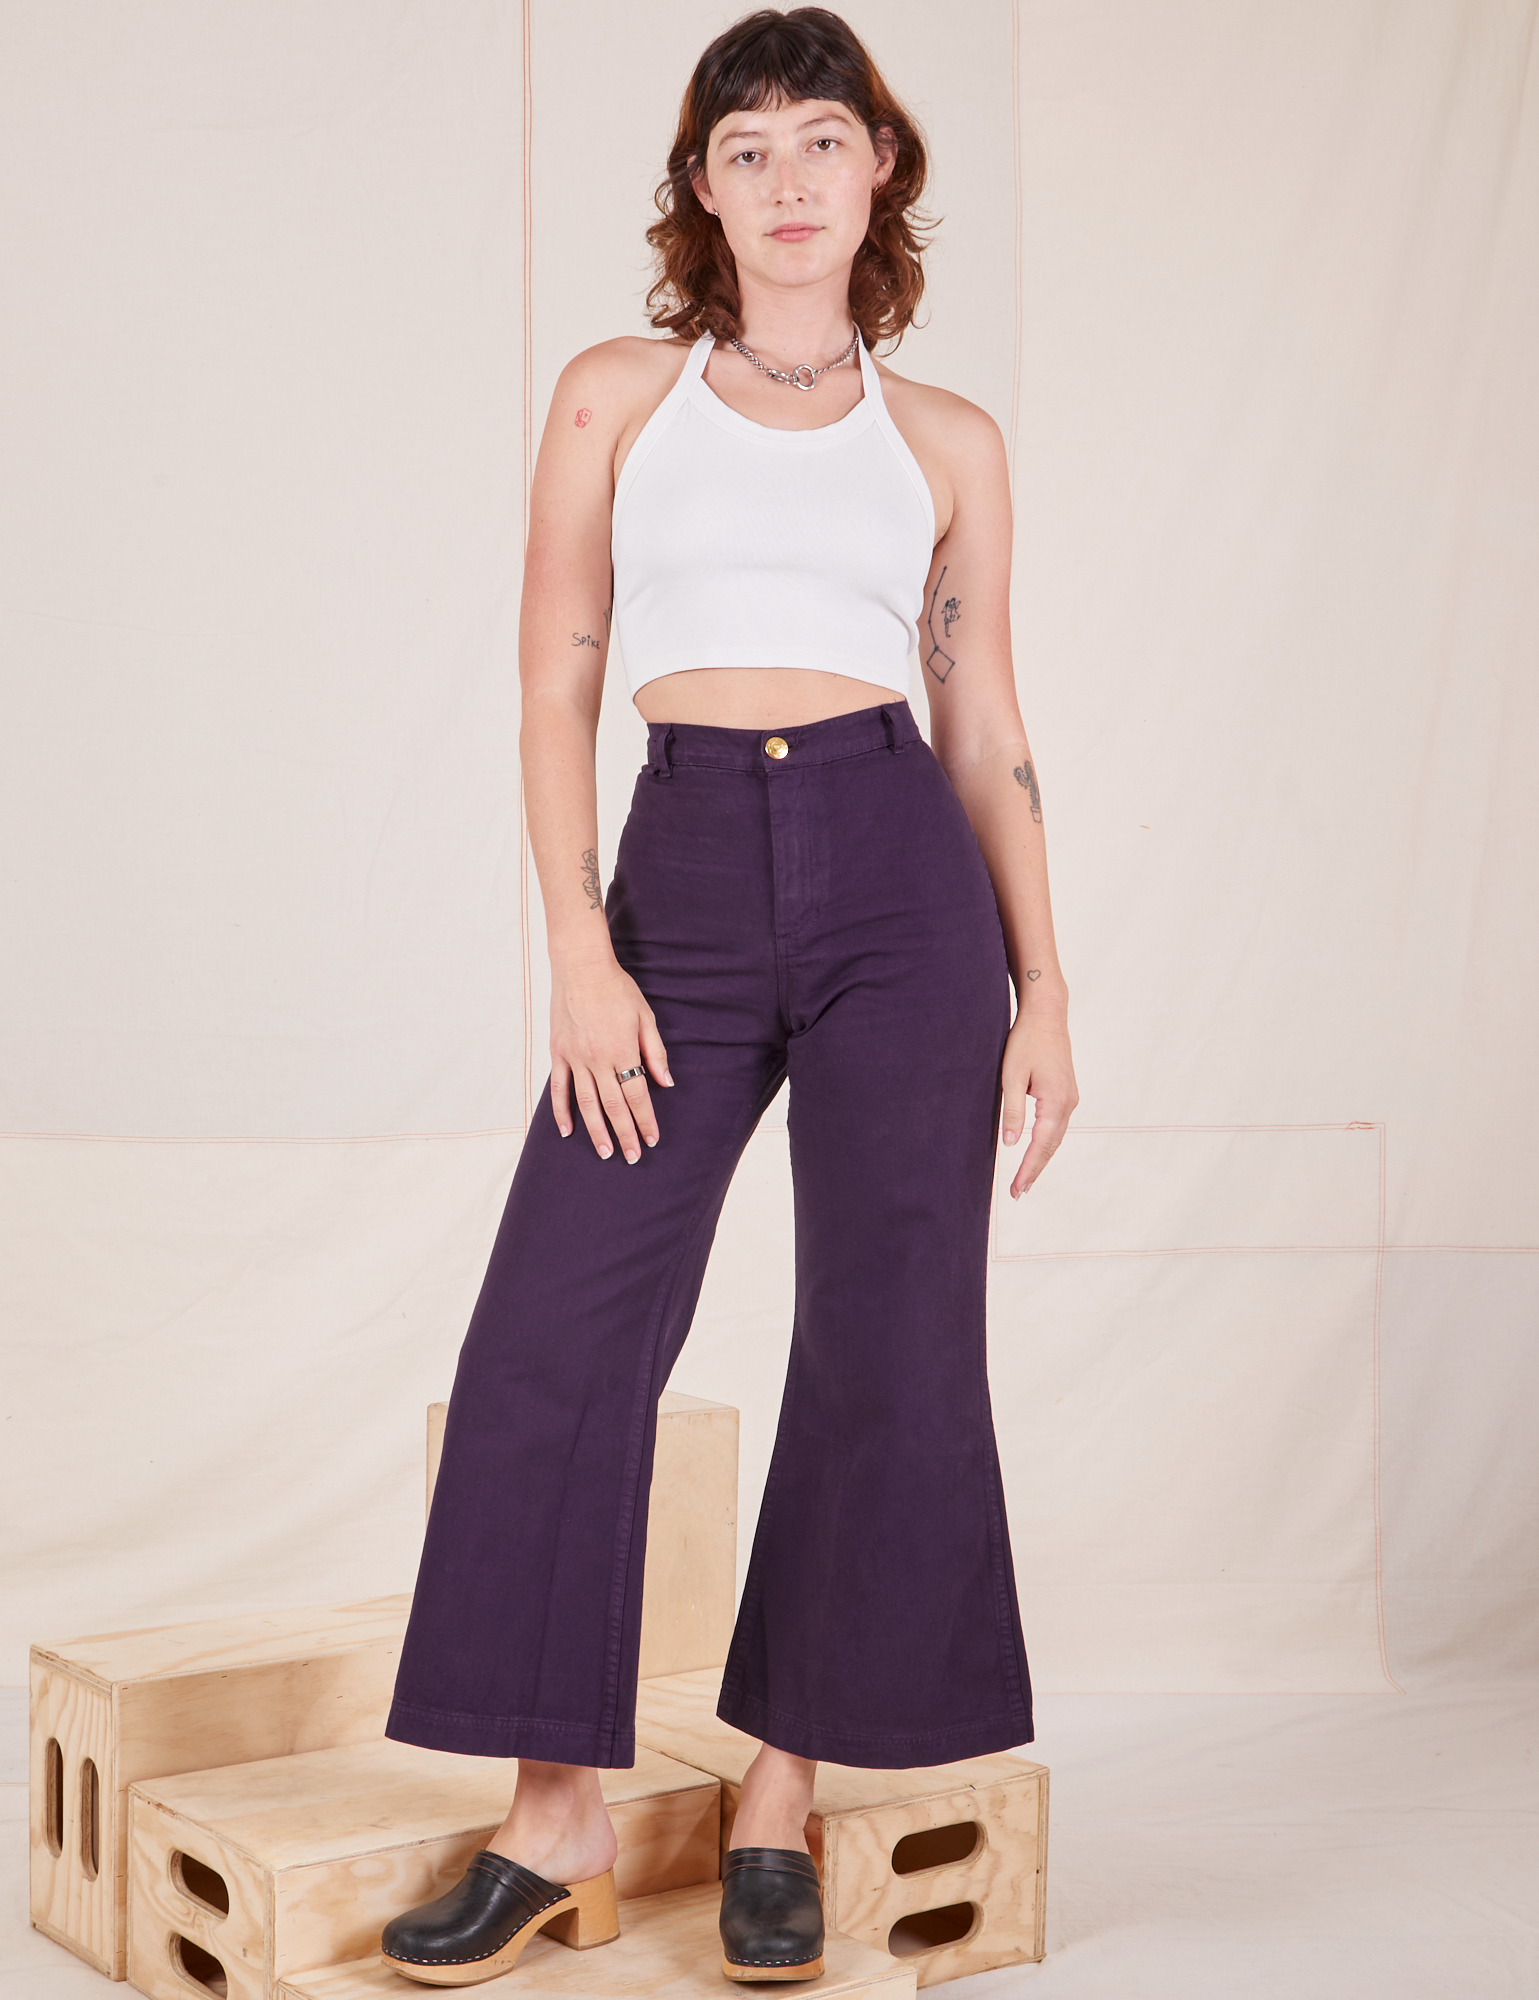 Alex is 5&#39;8&quot; and wearing XXS Bell Bottoms in Nebula Purple paired with Halter Top in vintage tee off-white